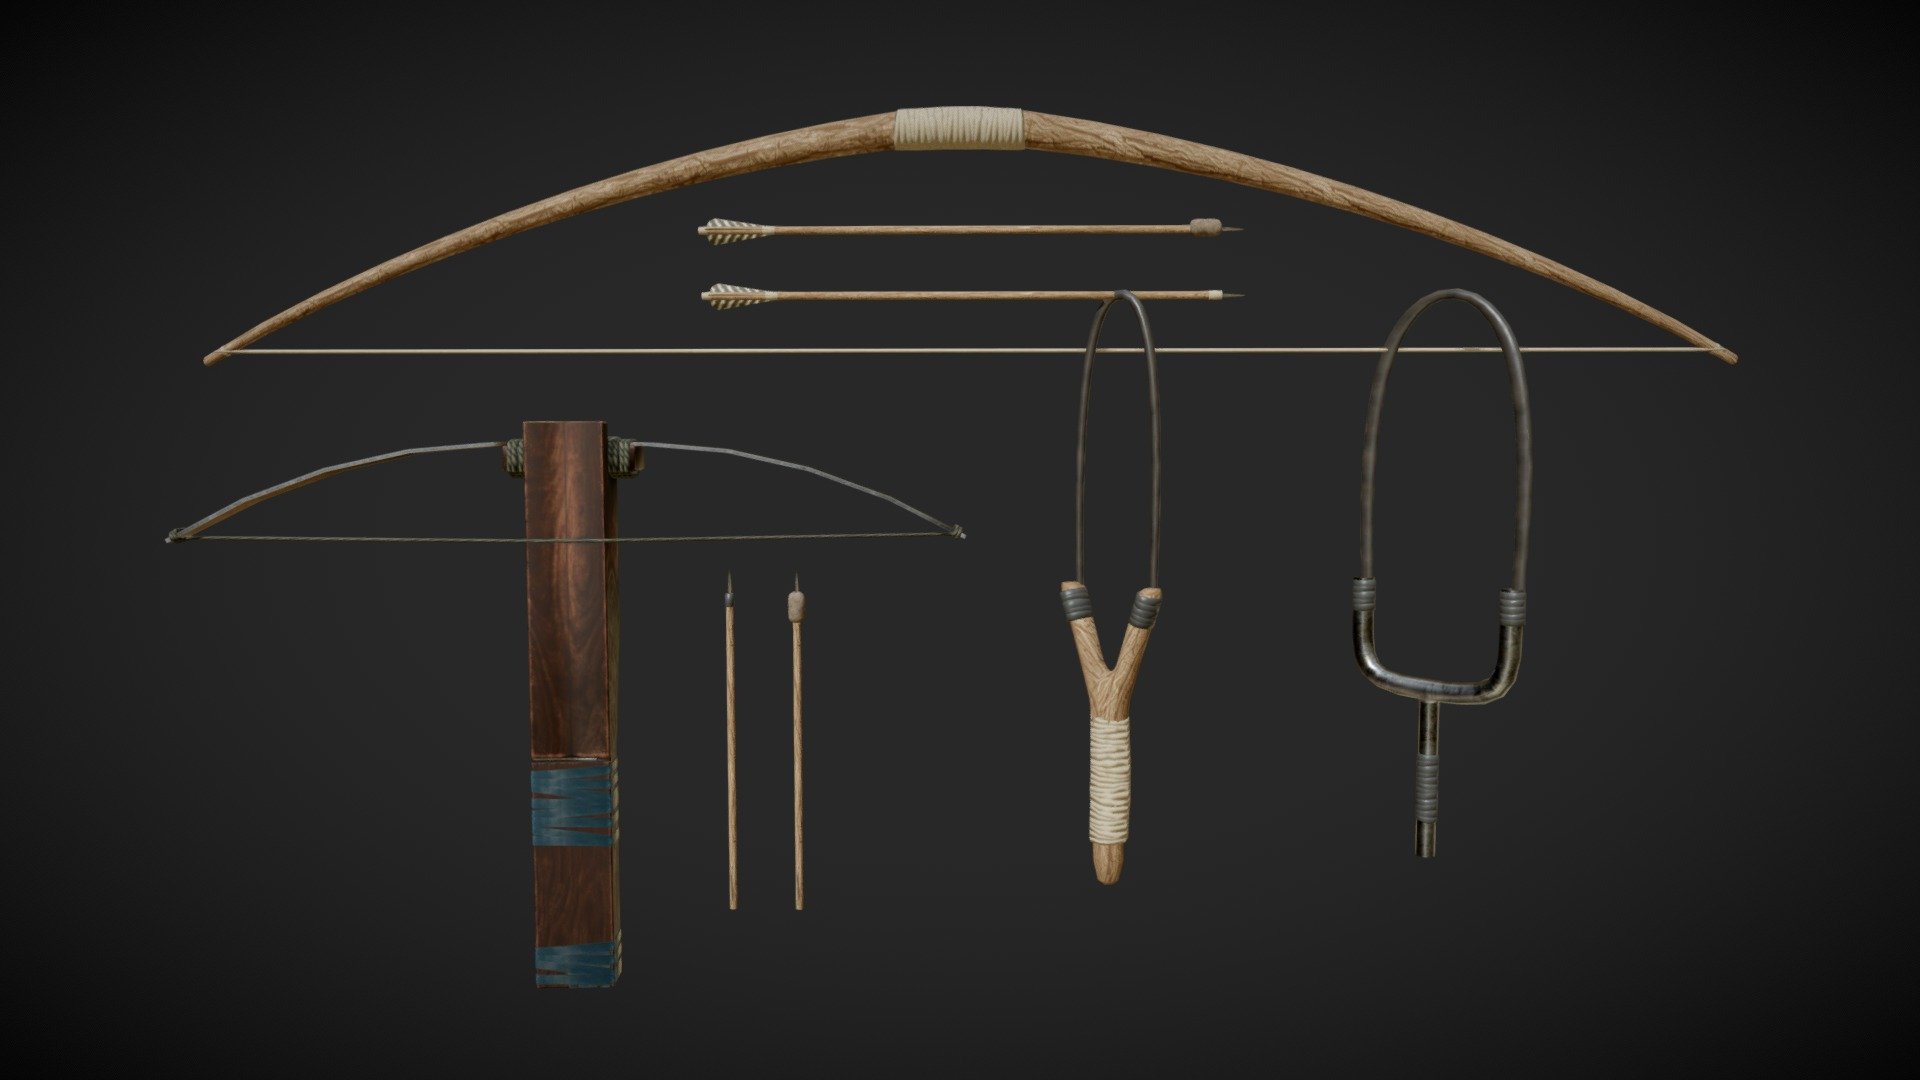 Crafted from natural and artificial materials, these makeshift weapons are suitable for survival games in modern or natural environments.

Read more about the Improvised Weapons props series here: 
https://runemarkstudio.com/unity-assets/improvised-weapons/ - Makeshift Ranged Weapons - 3D model by RunemarkStudio 3d model